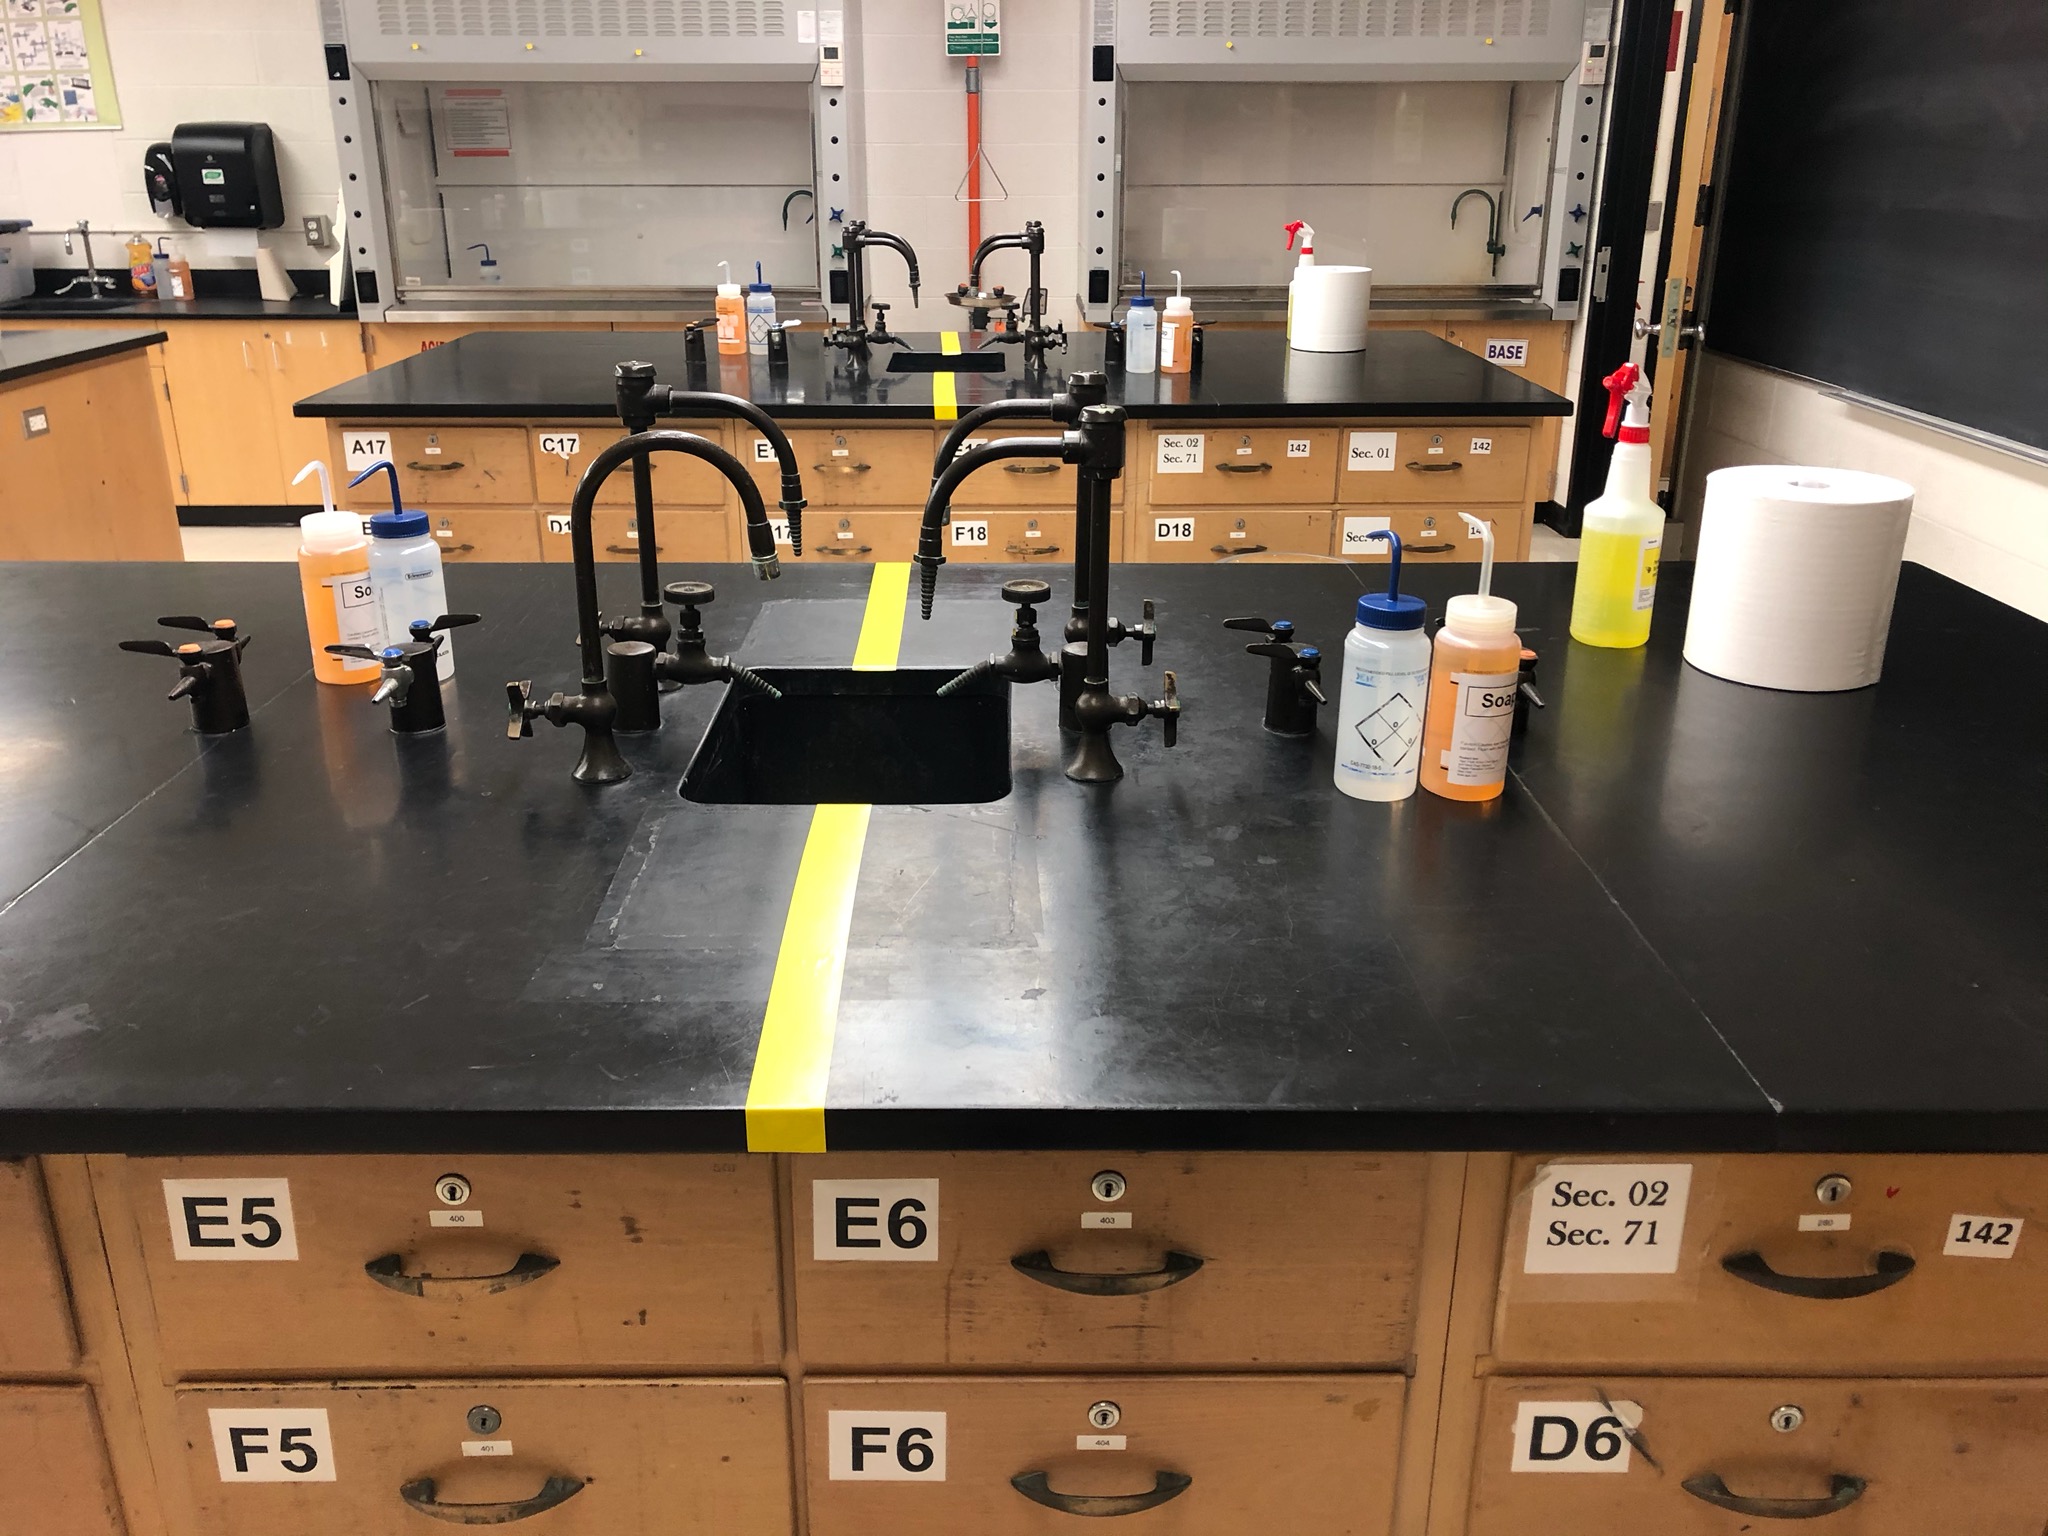 Organic chemistry bench tops sectioned by yellow tape. Every student is provided their own deionized water and soap bottles. Only essential items for each lab are placed at every student station. Photo taken by Ms. Alice Hull